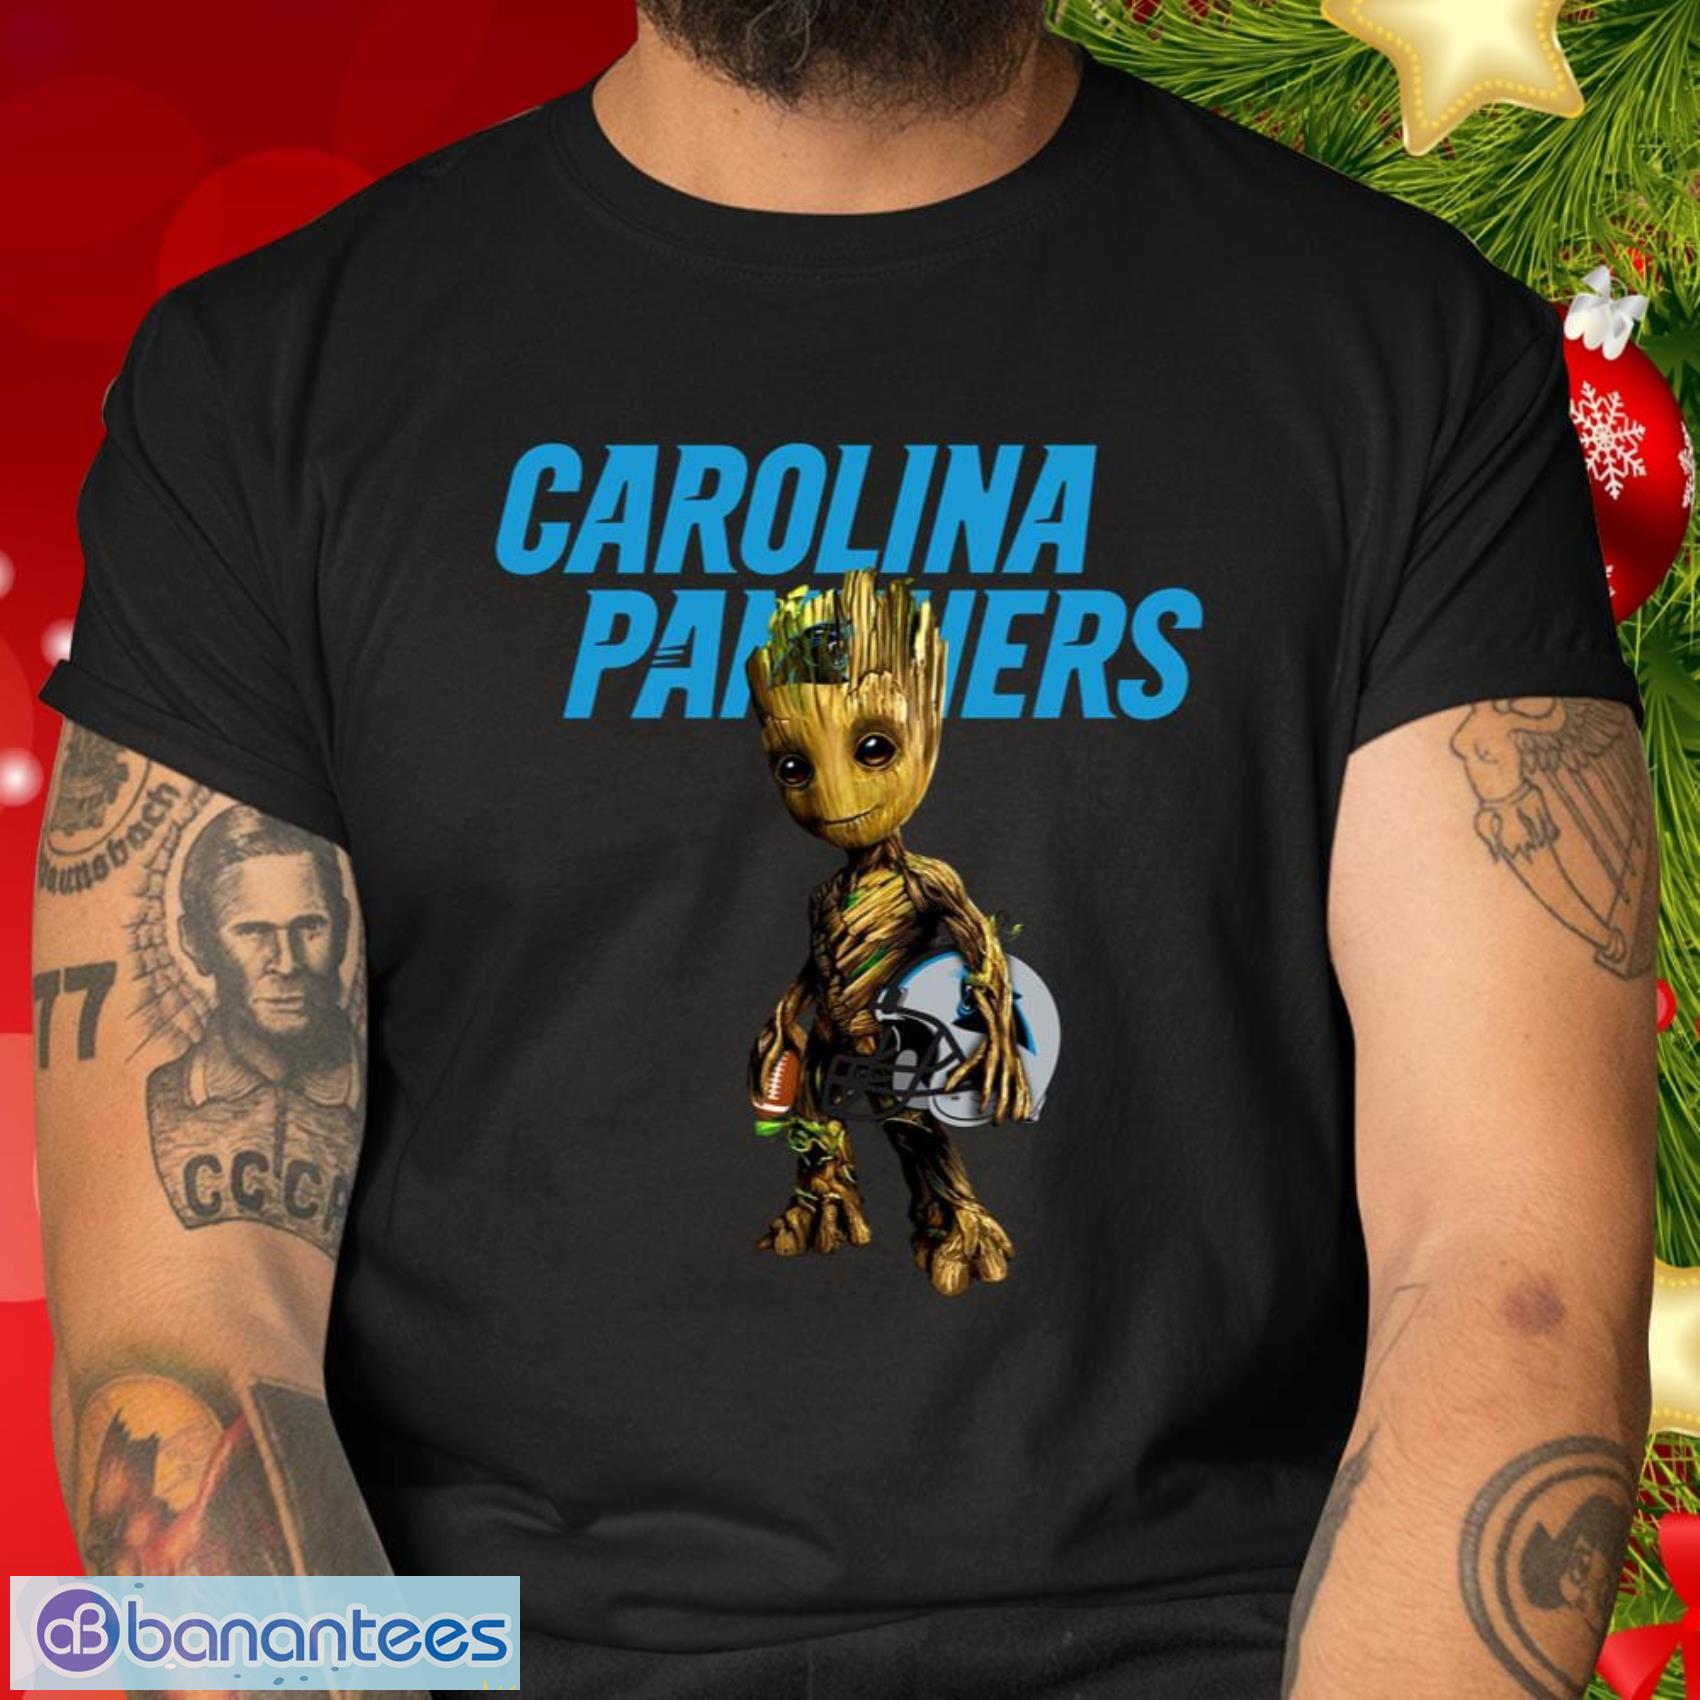 Carolina Panthers NFL Football Gift Fr Fans Groot Marvel Guardians Of The Galaxy T Shirt - Carolina Panthers NFL Football Groot Marvel Guardians Of The Galaxy T Shirt_2